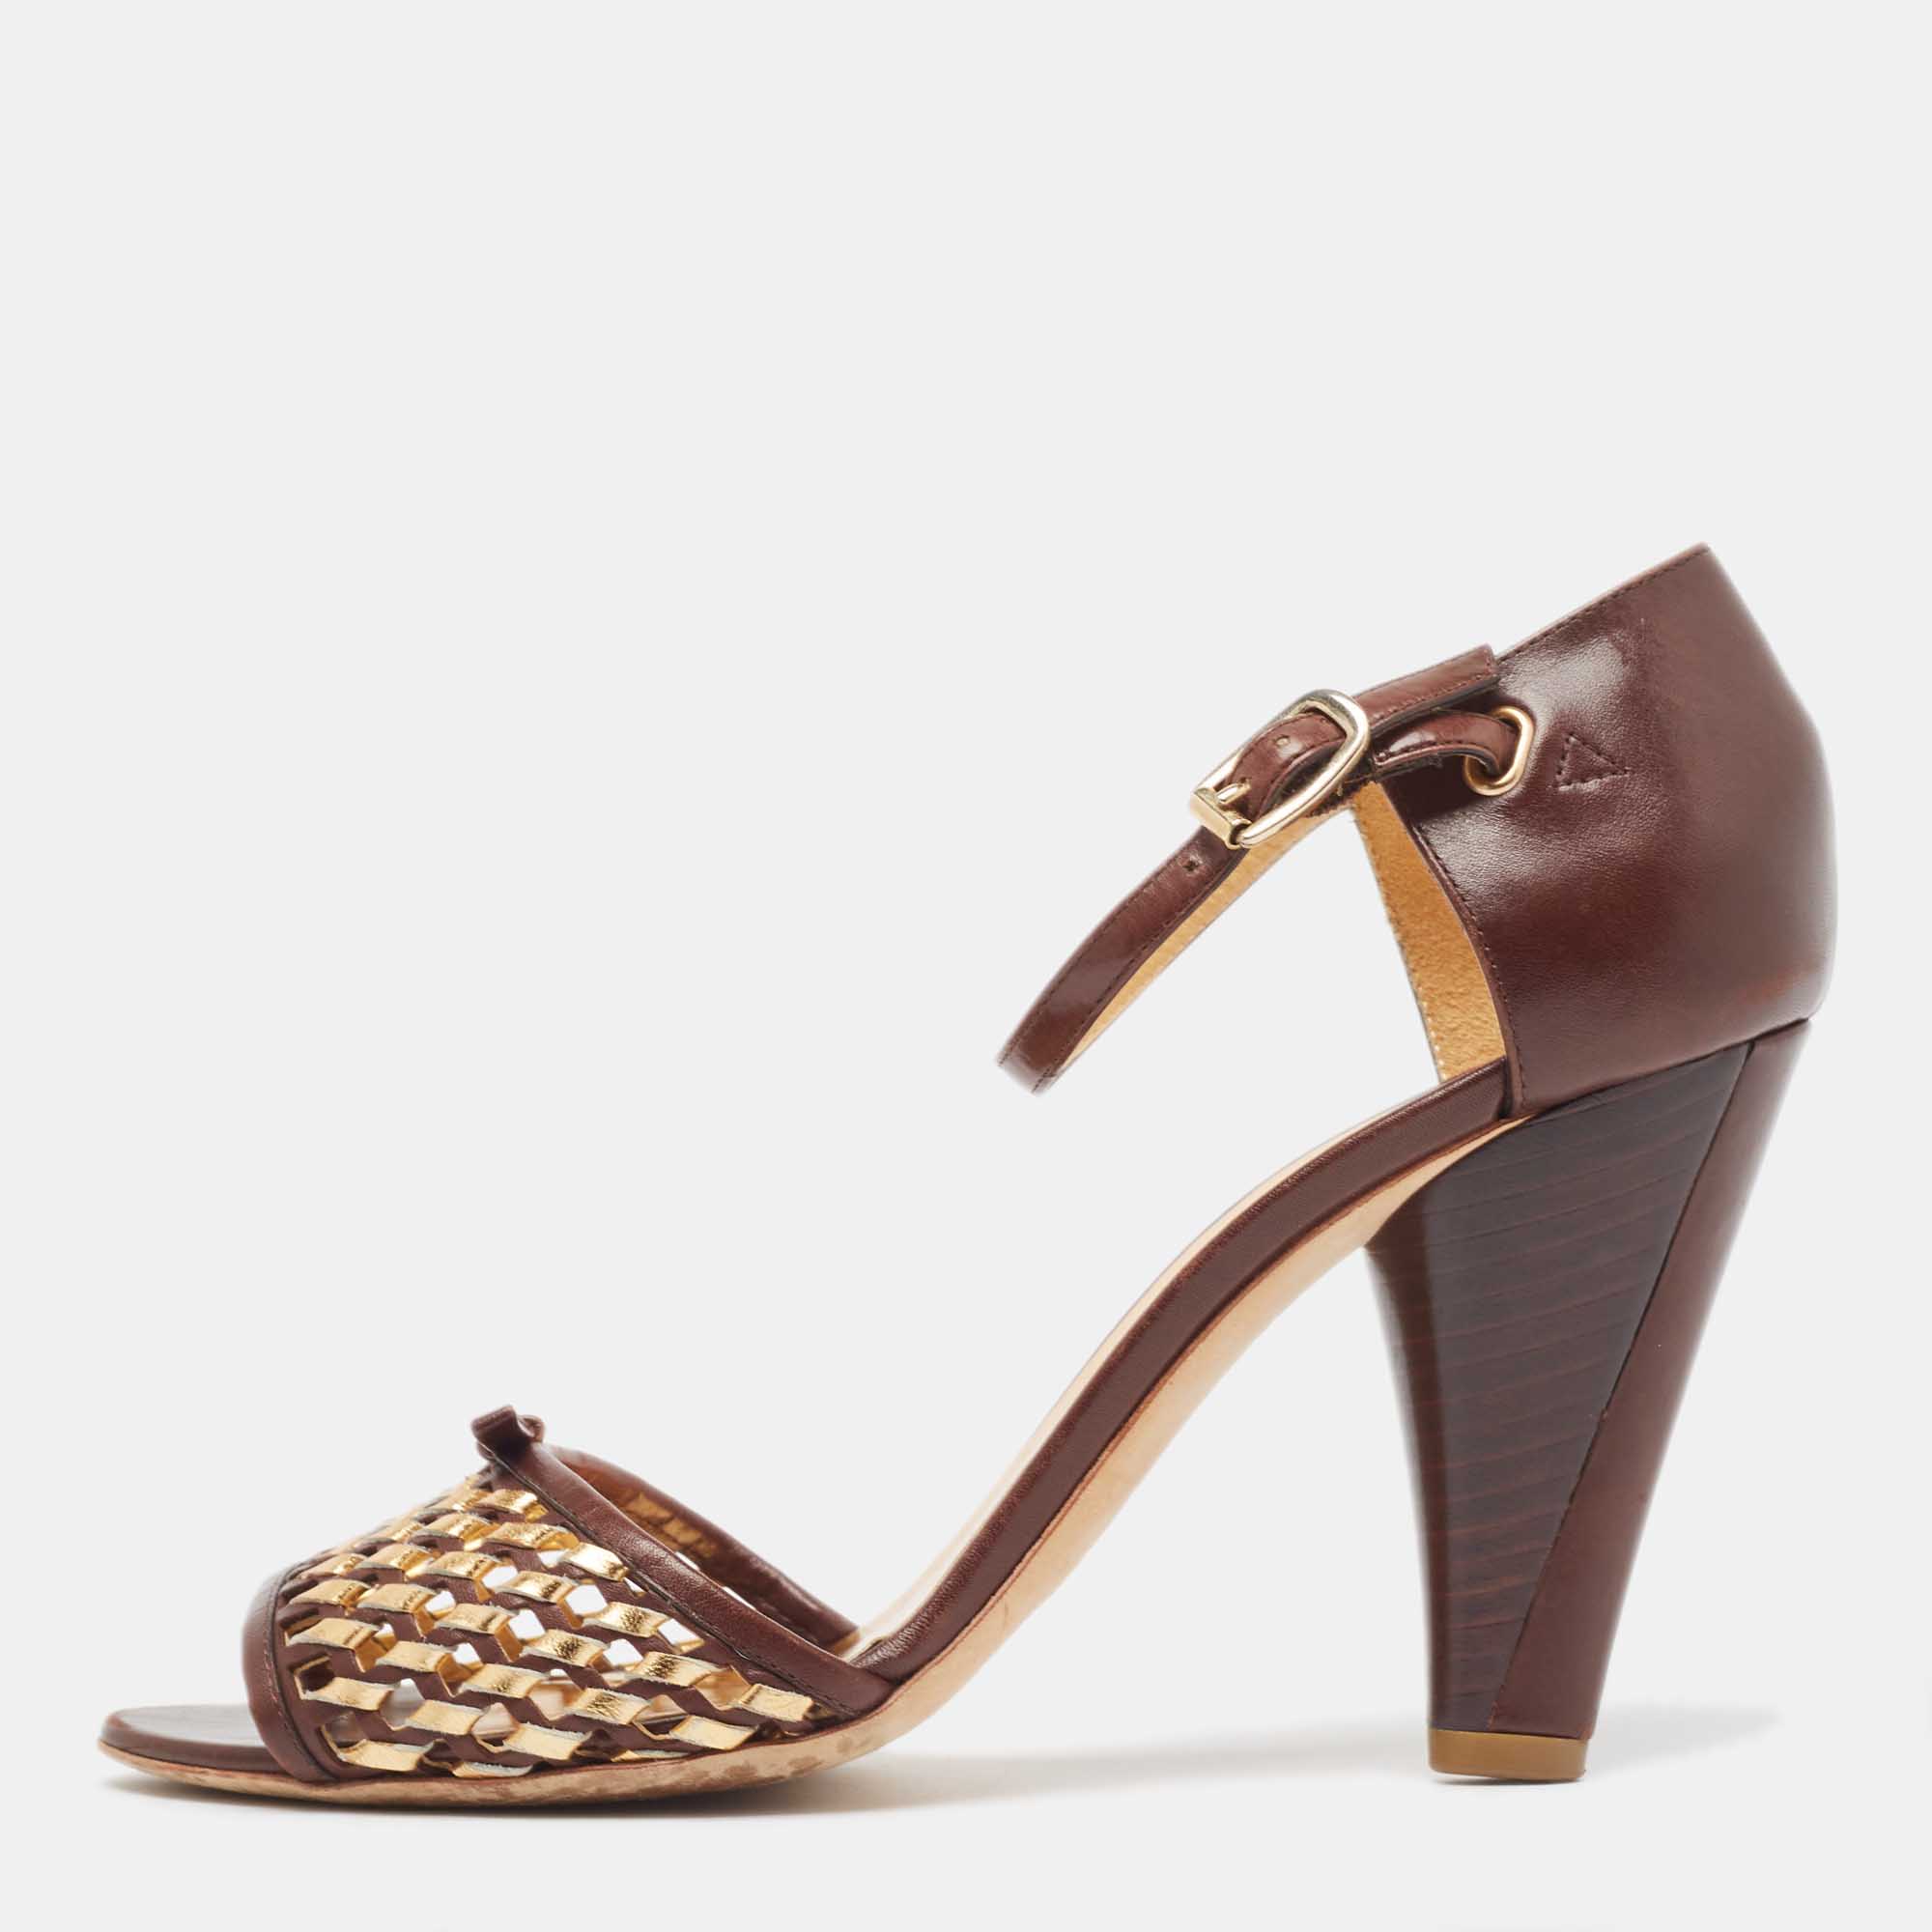 Marc by marc jacobs brown/gold leather ankle strap sandals size 37.5